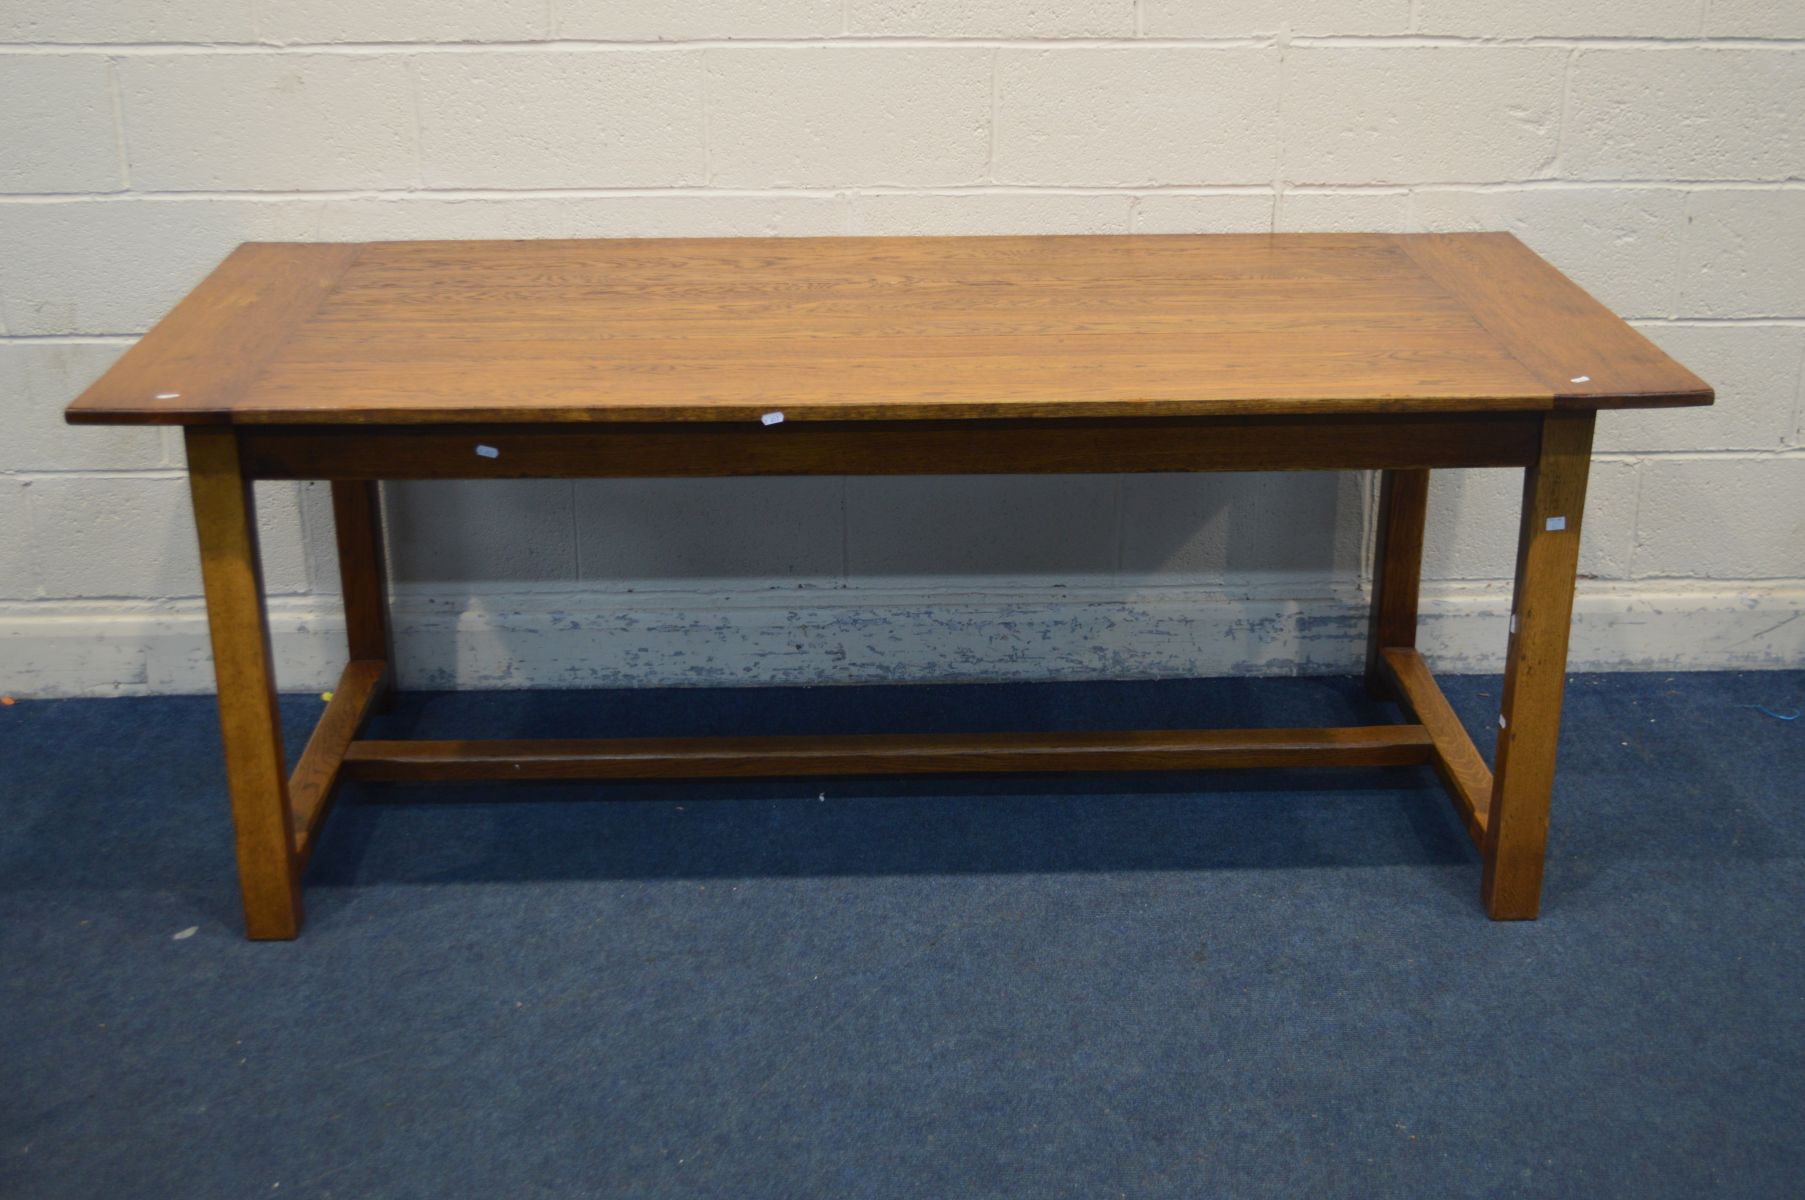 A REPRODUCTION OAK REFECTORY TABLE, in an 18th century style, plank top, on chamfered legs united by